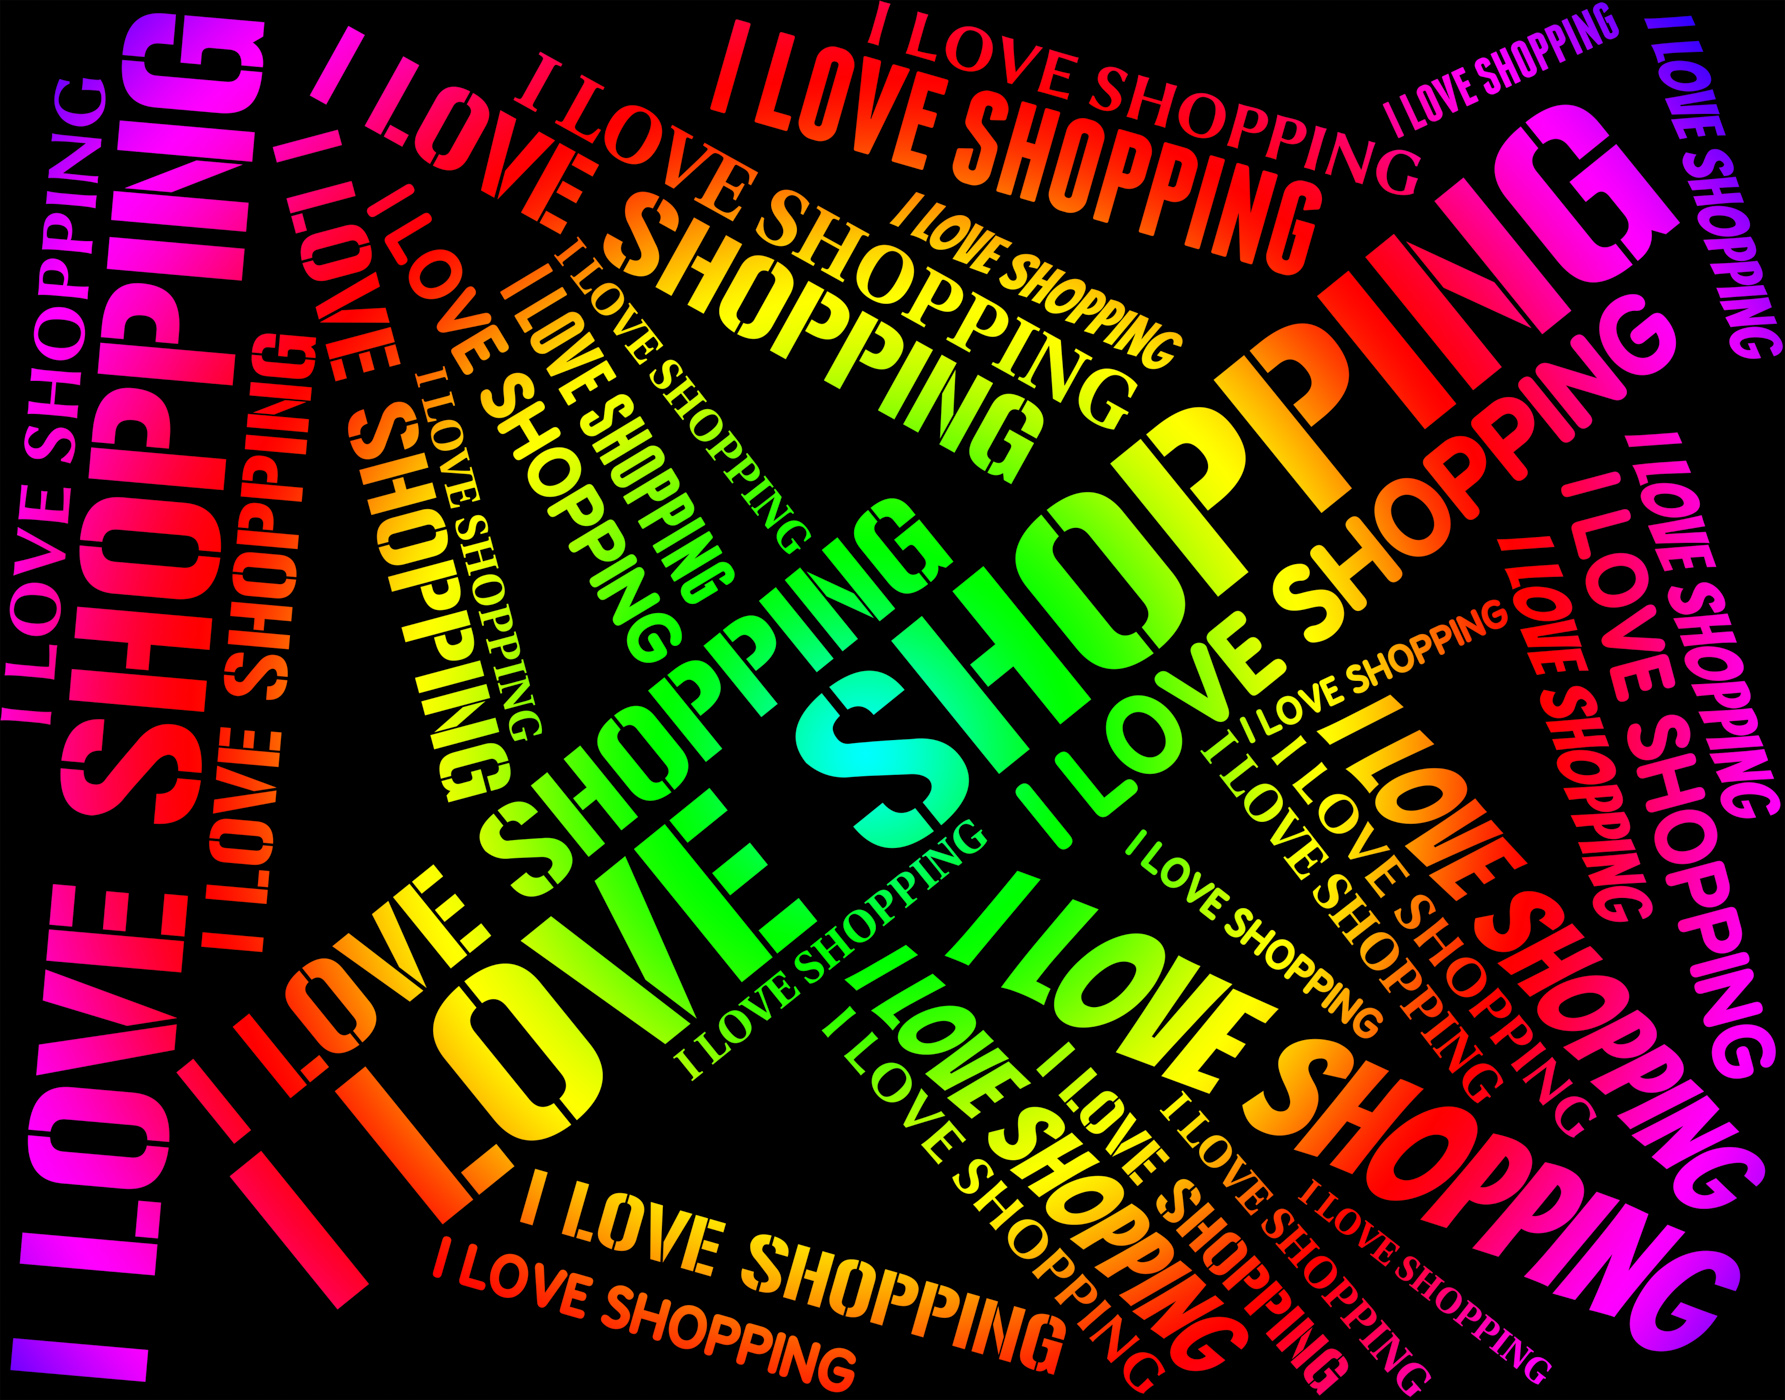 One love shop. Commercial activity фото текста. Лов шоп. I Love shopping. Commercial activity картинки с надписью.